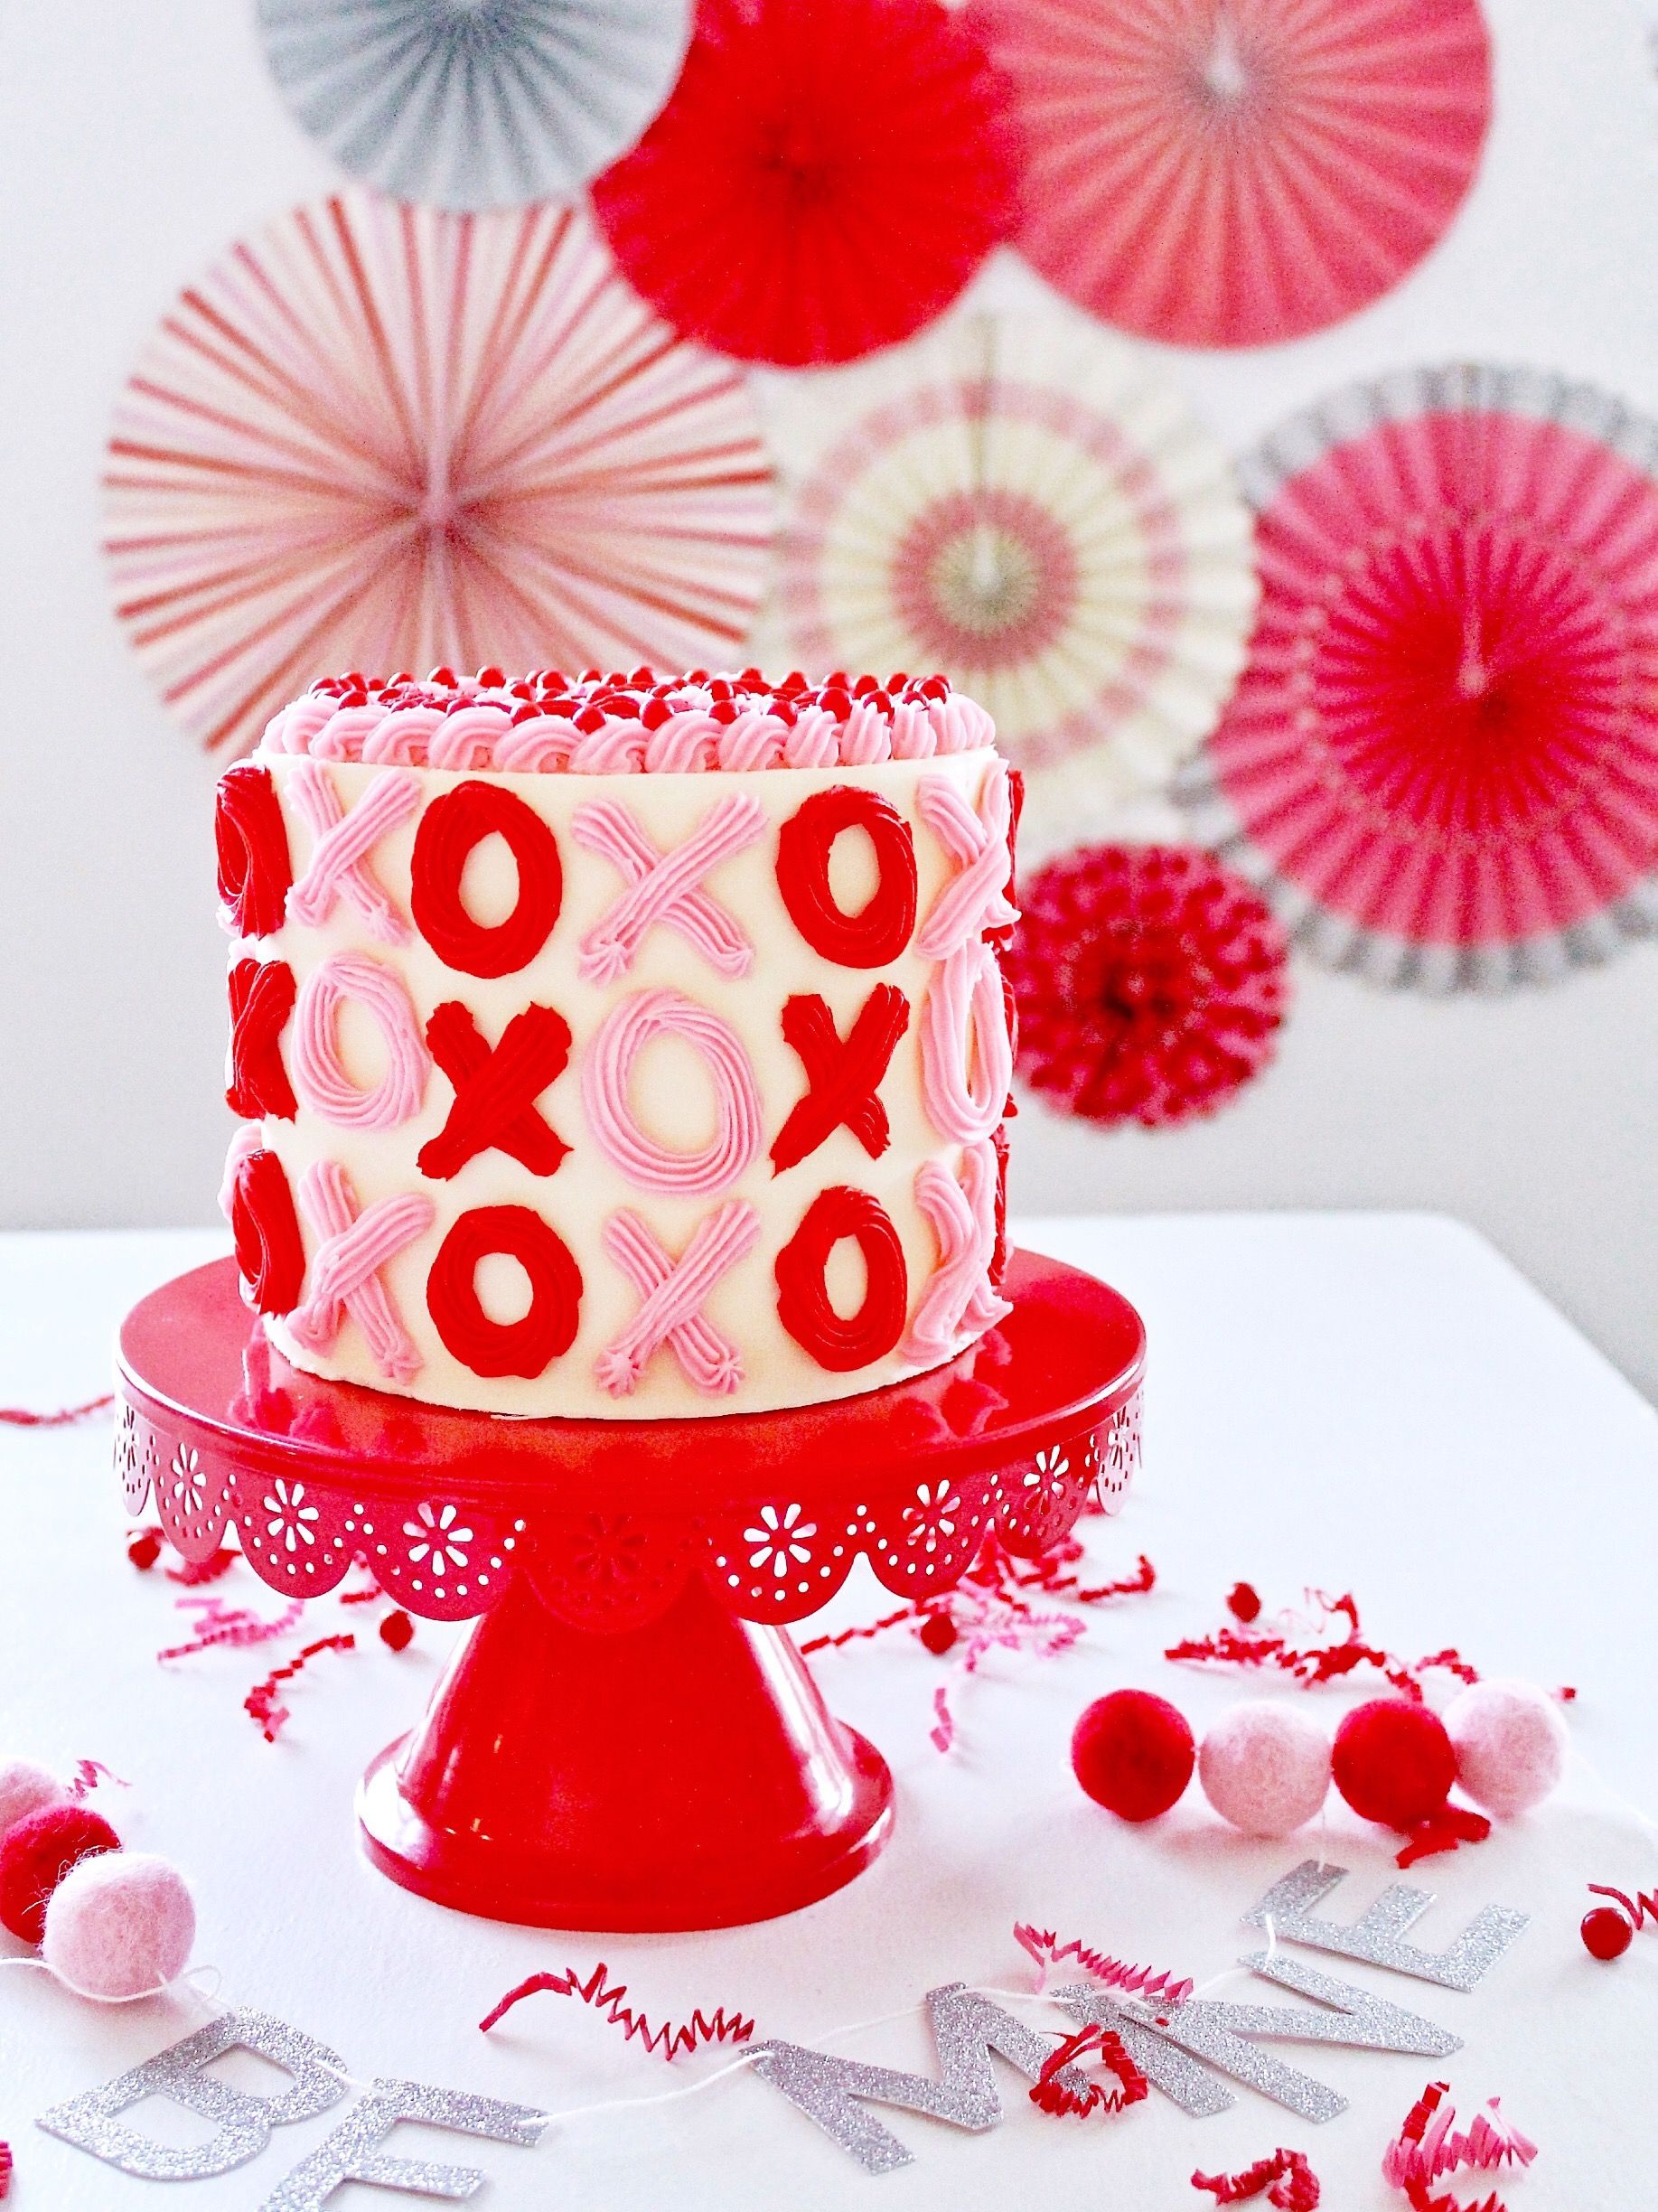 Cake by Courtney: 7 Cute and Easy Valentine's Cake Ideas -   16 valentines cake ideas